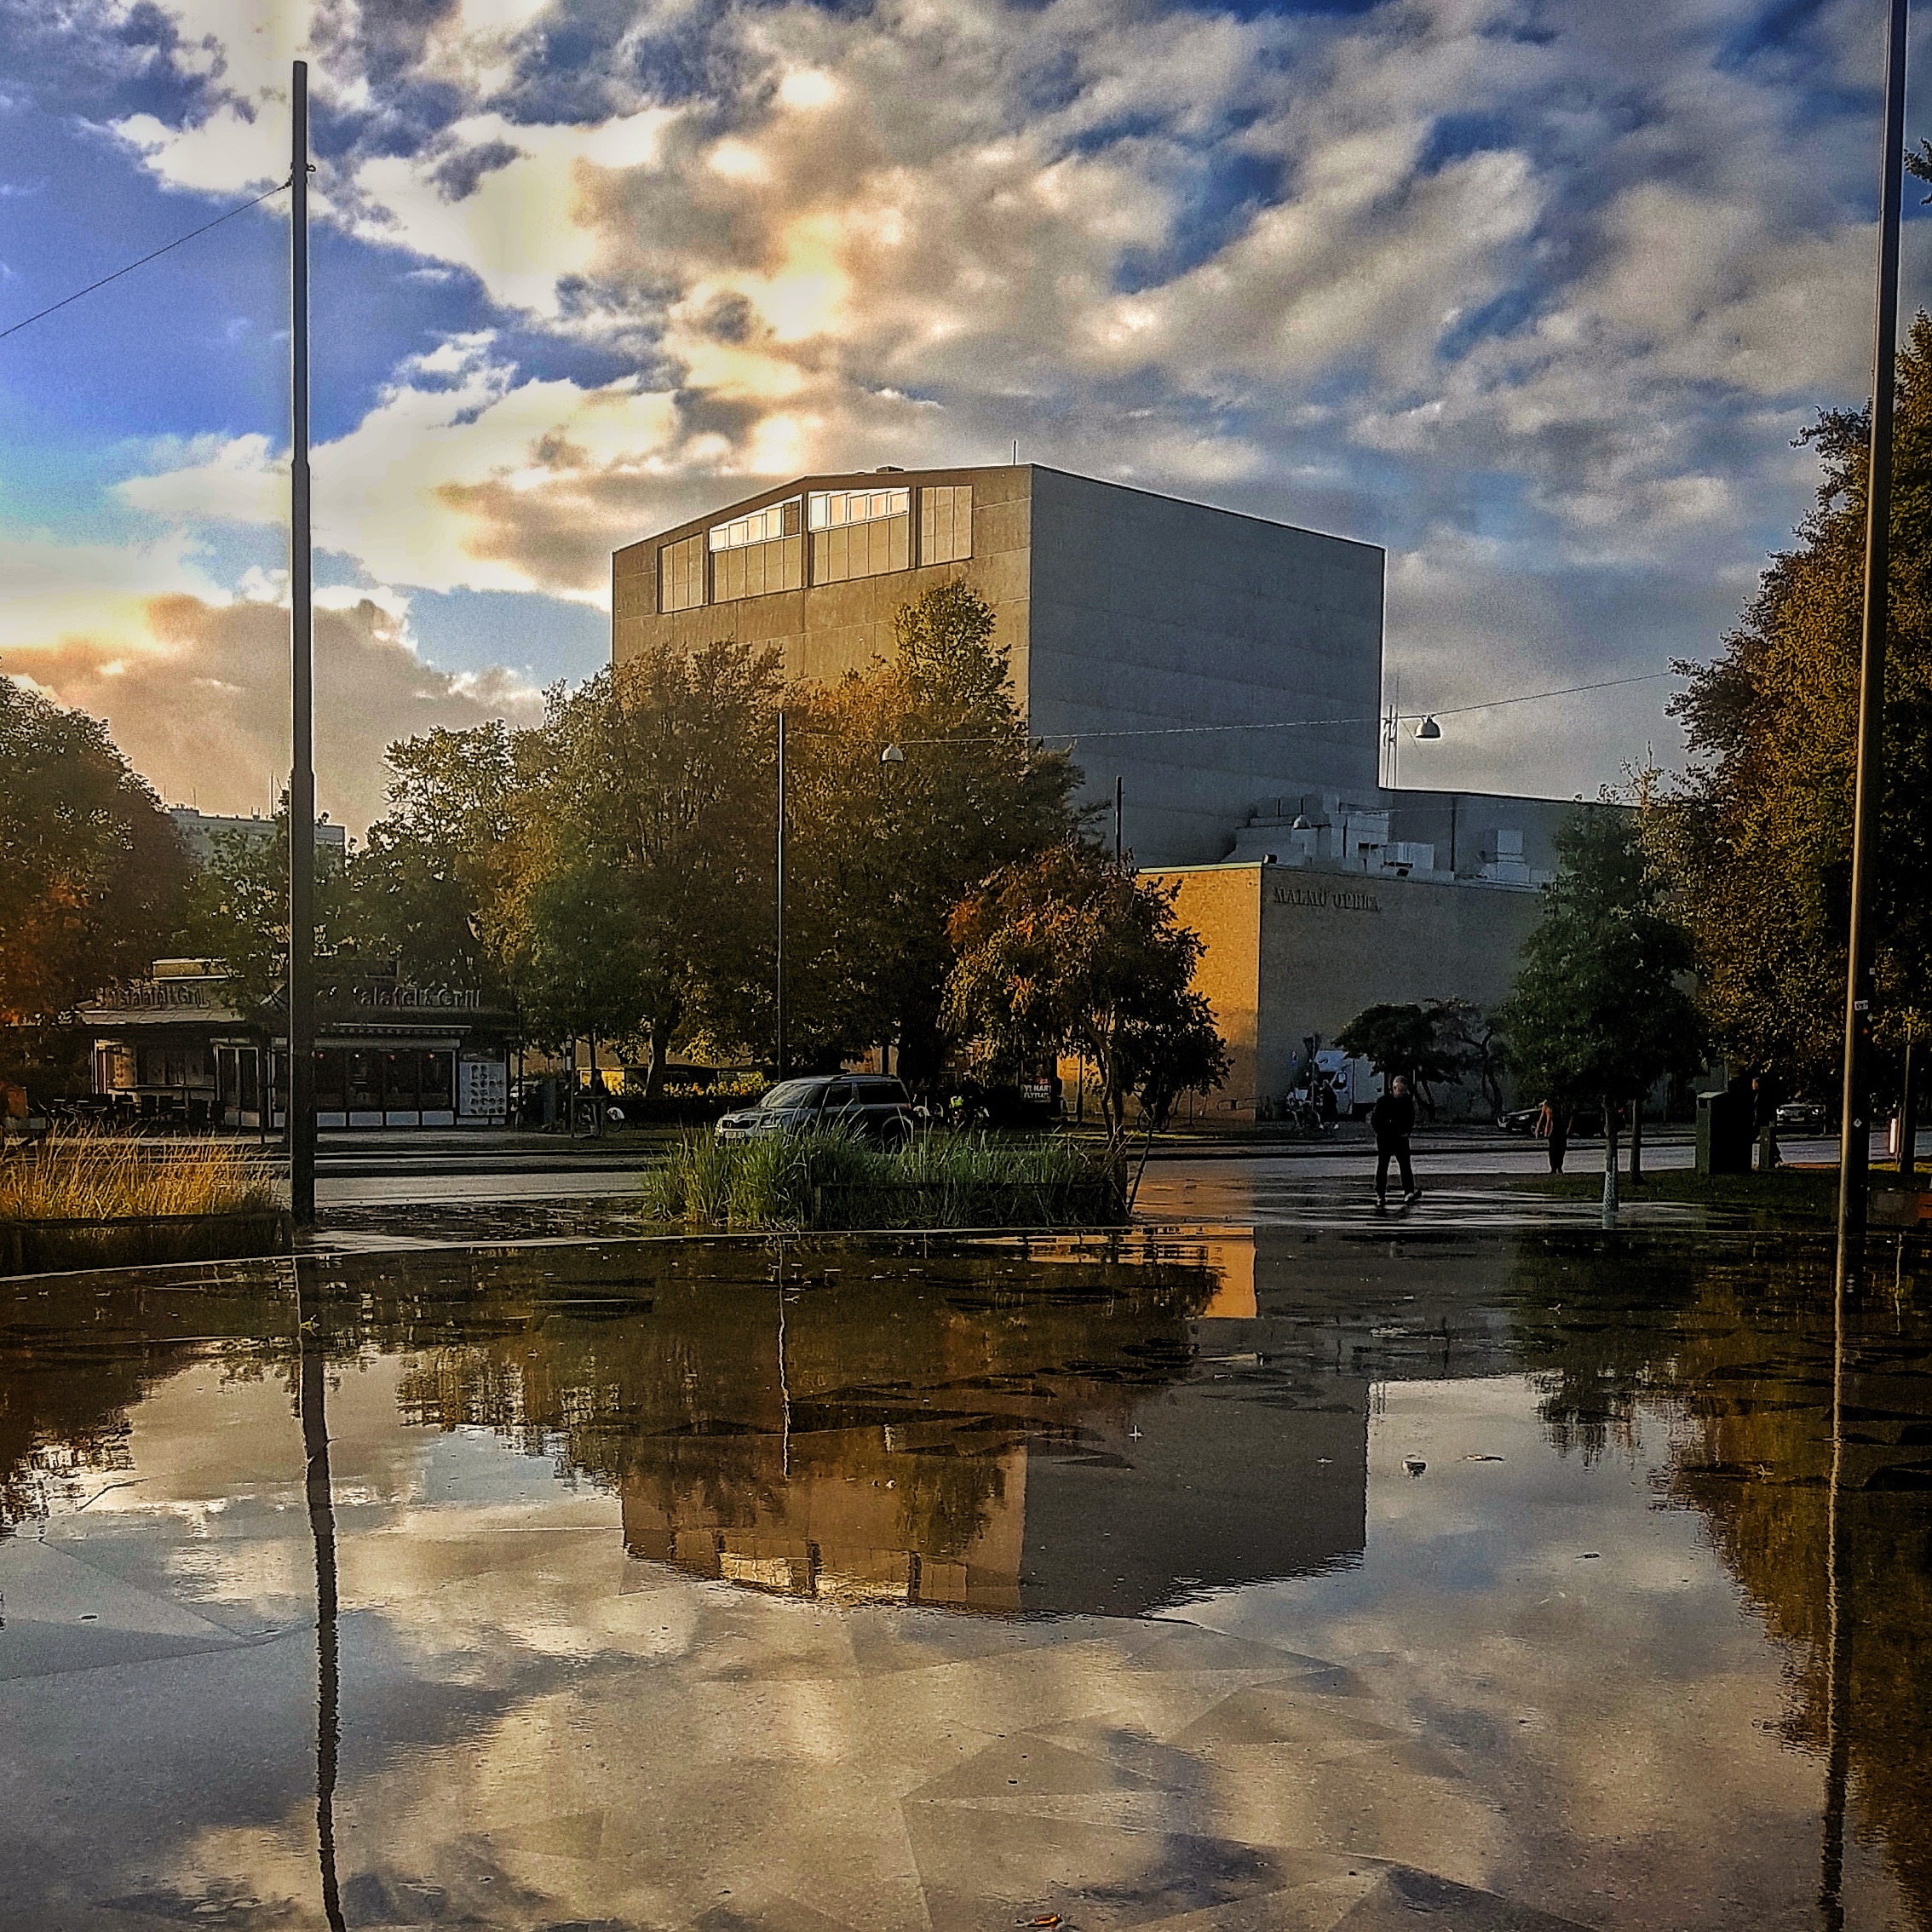 Day 278 - October 5: Reflection